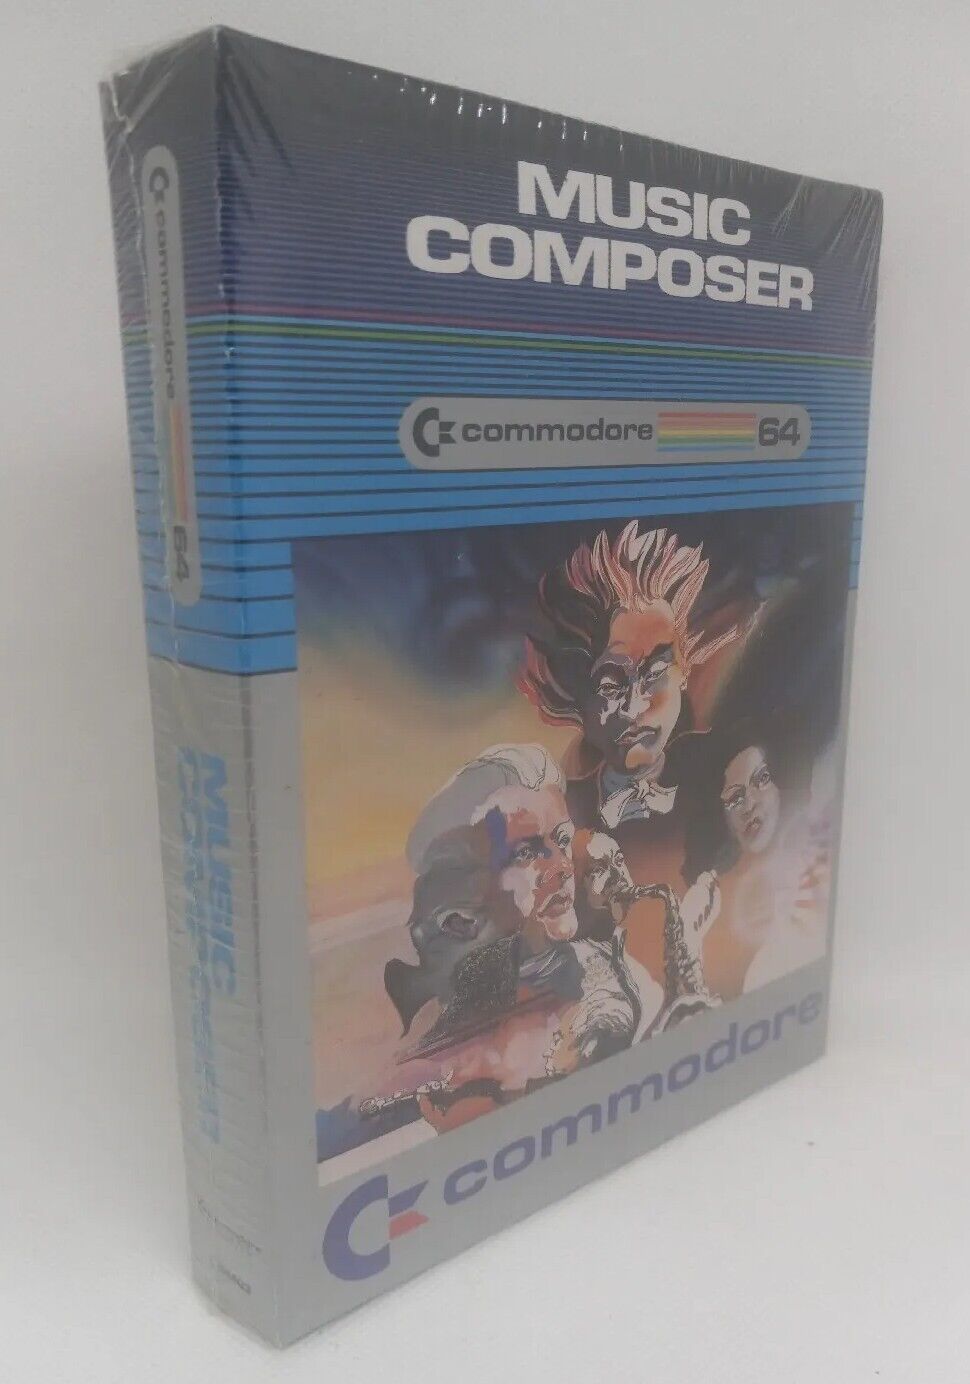 Commodore 64 - Music Composer * Vintage 1981 Brand New & Factory Sealed